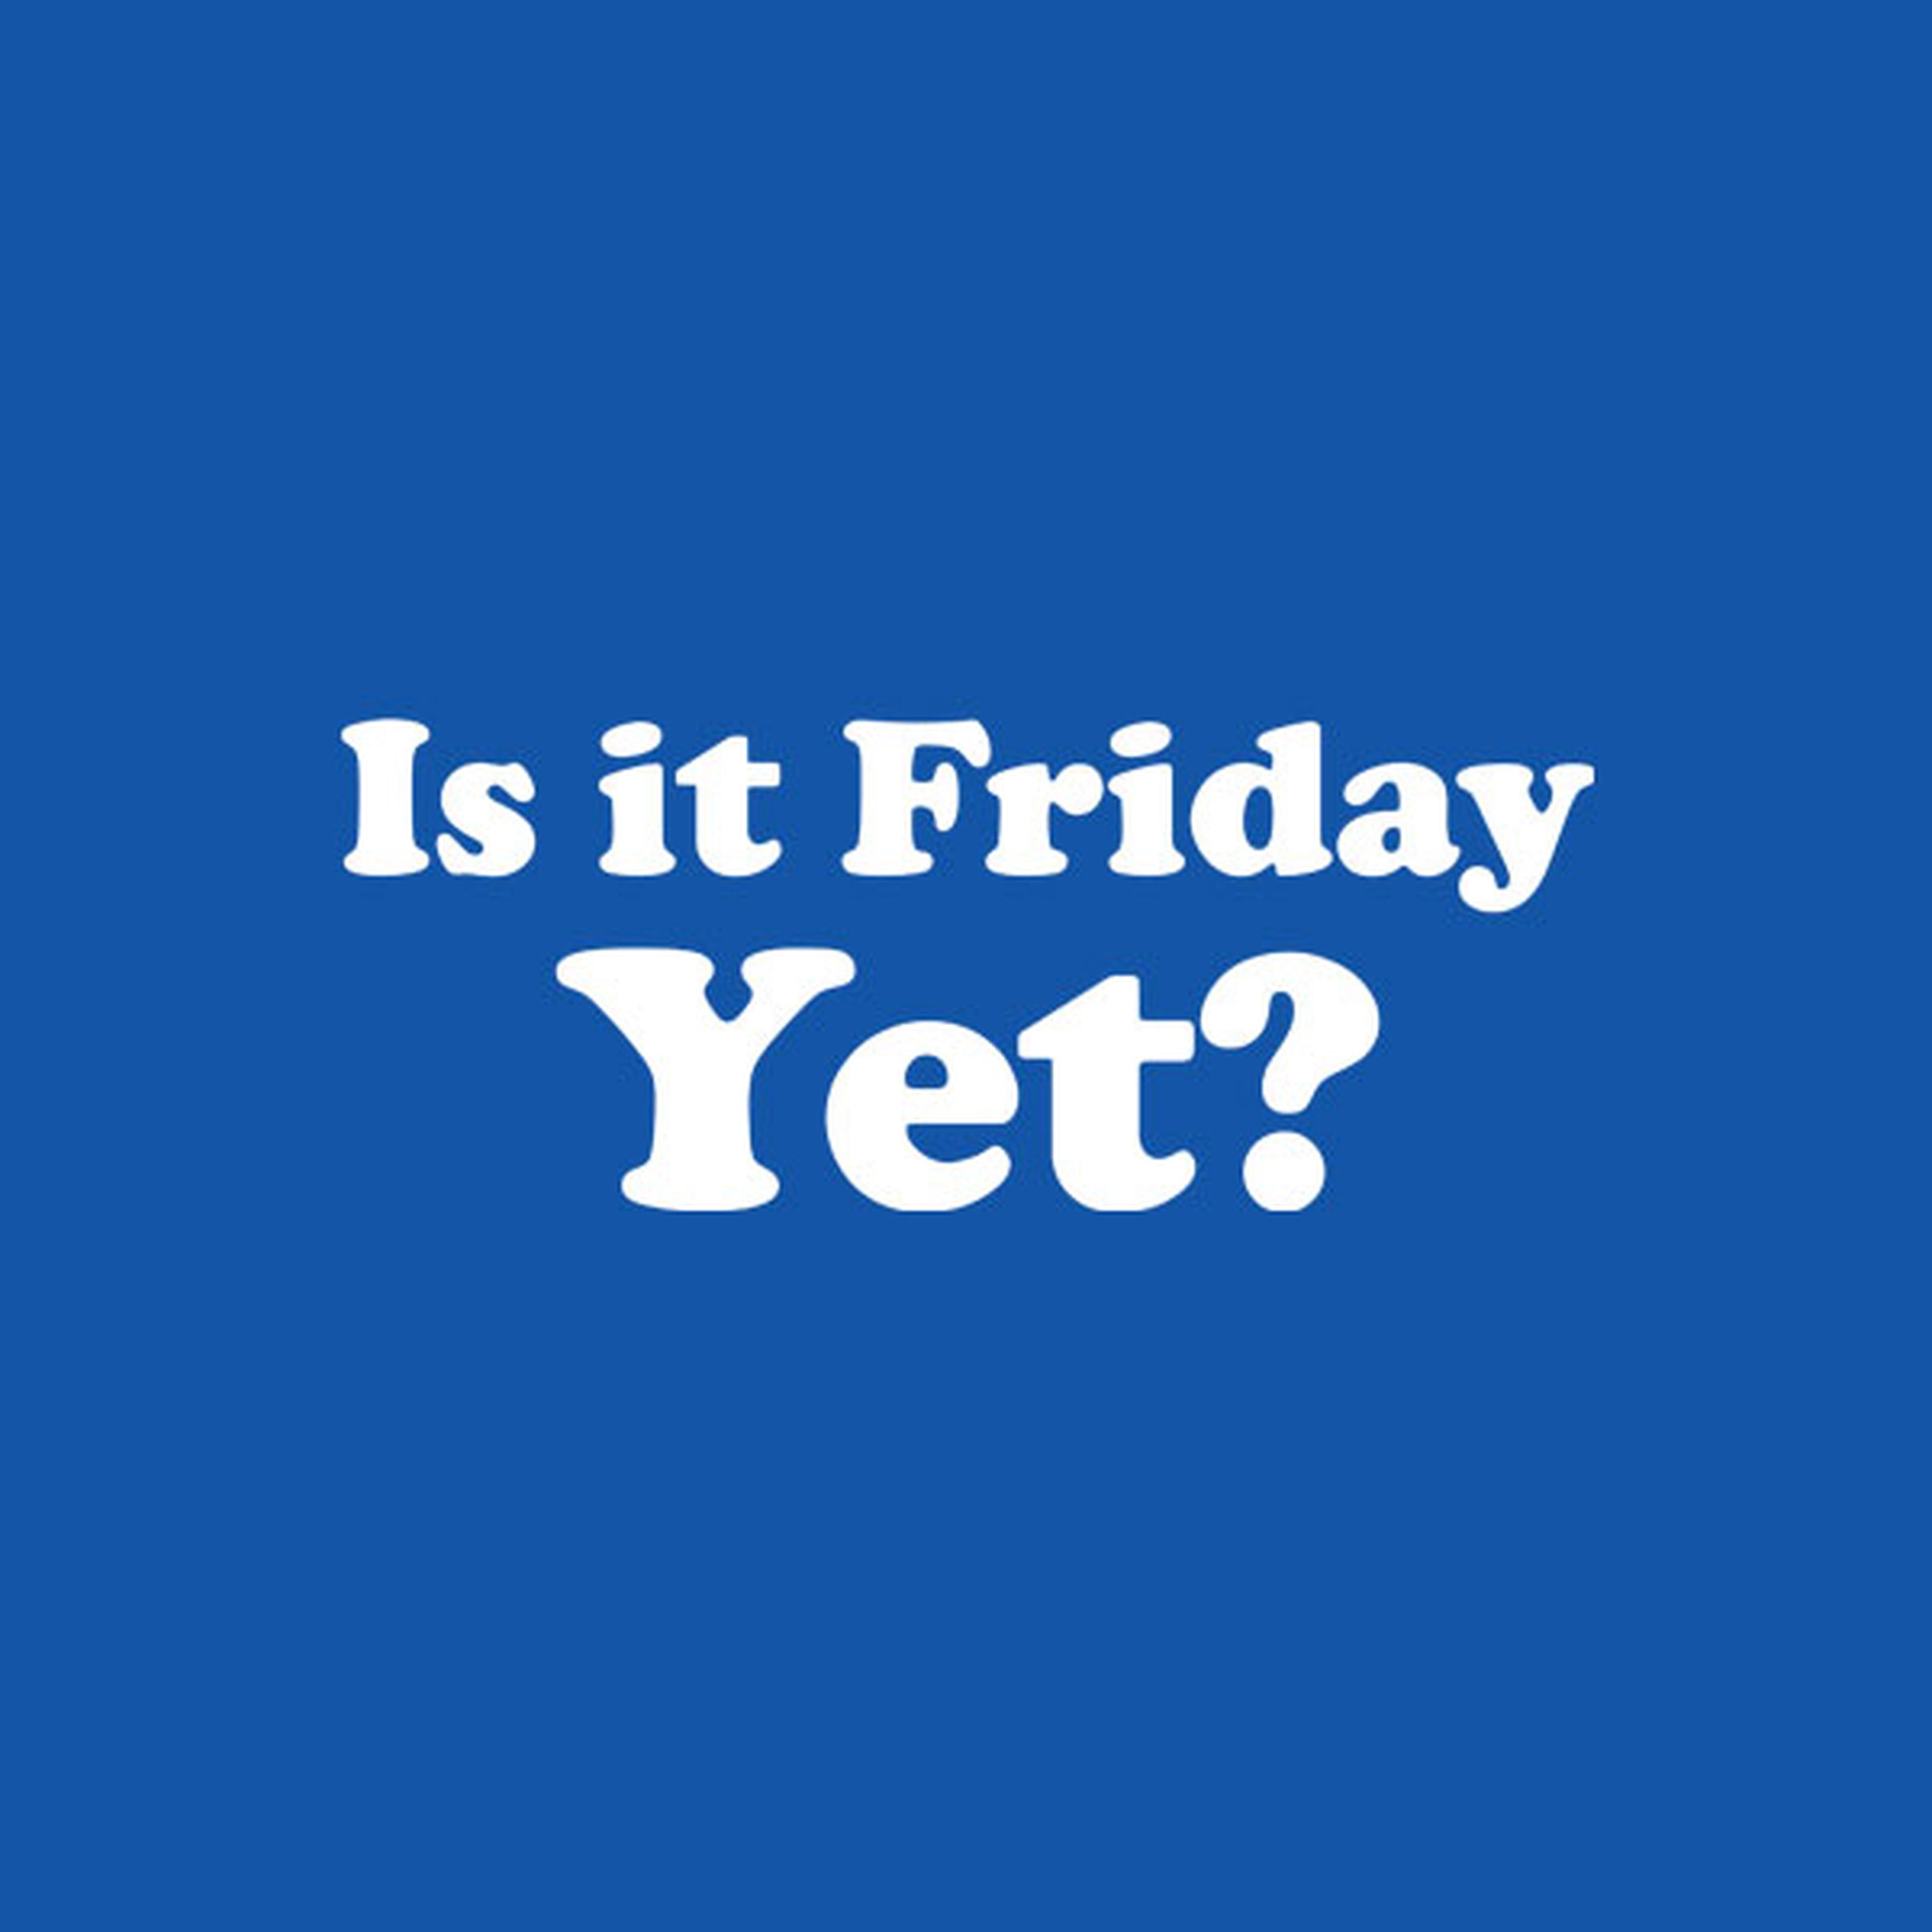 Is it Friday yet? - T-shirt